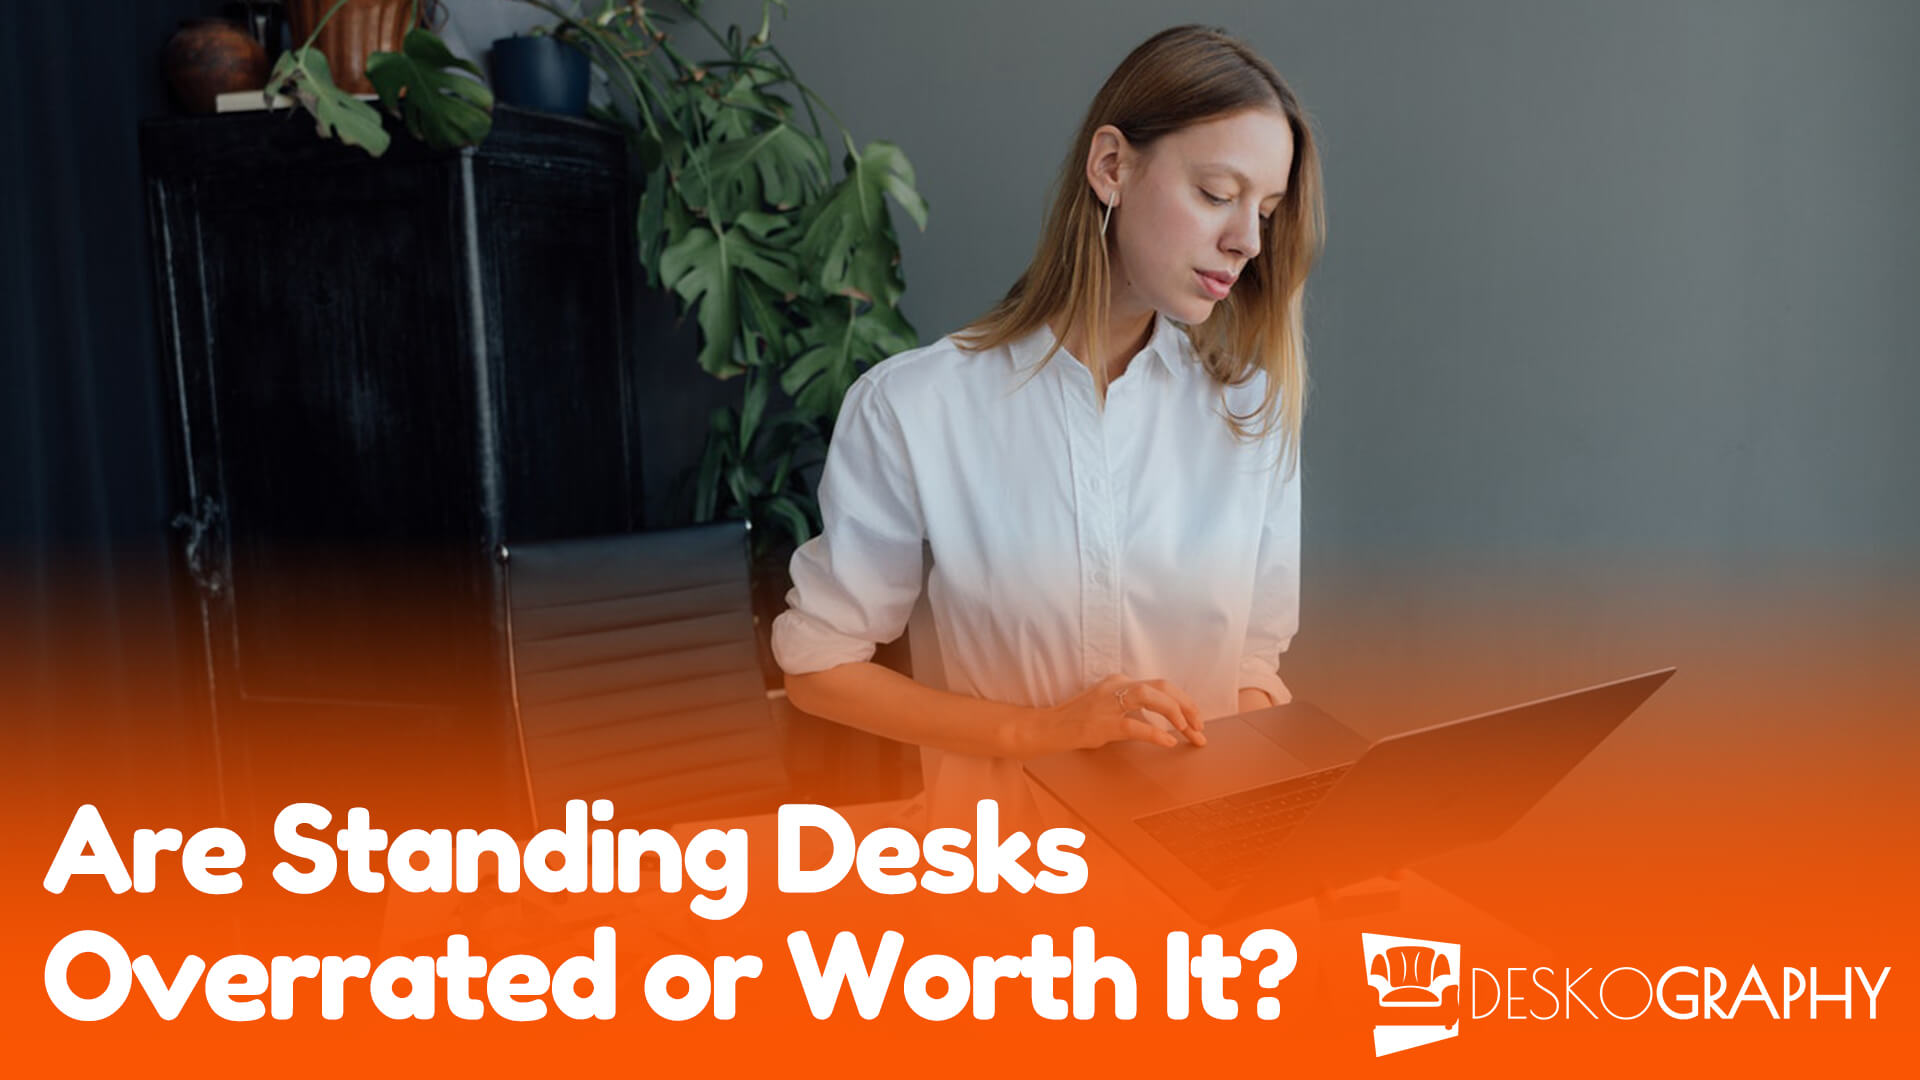 Are standing desks overrated or worth it